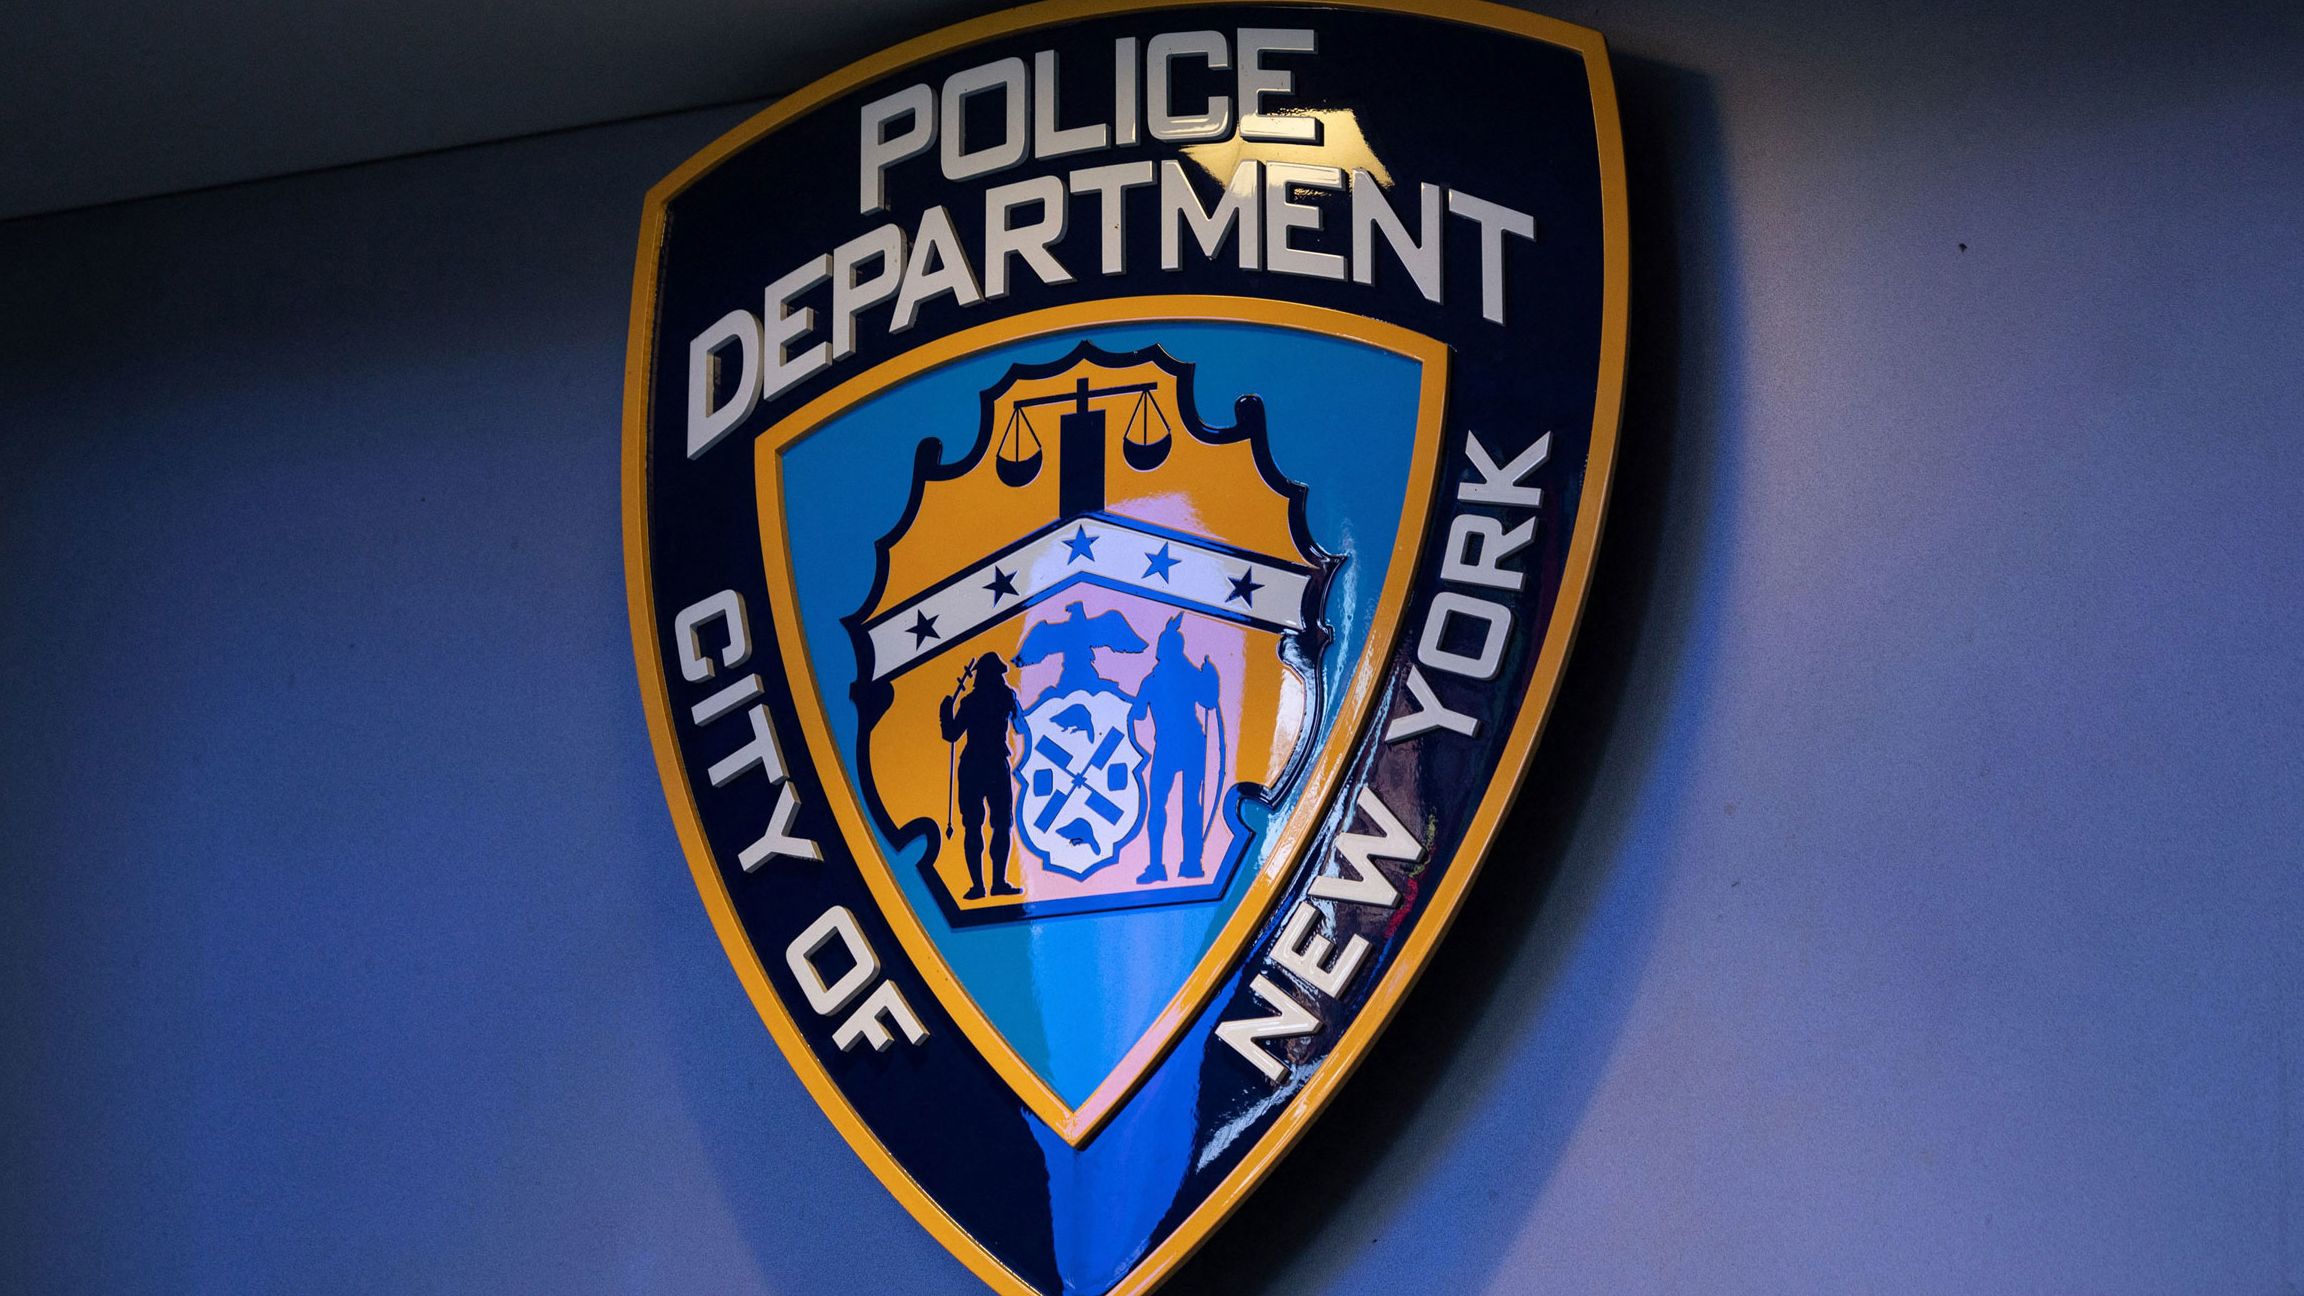 The charges against the girls come as hate crimes in New York were reported to have increased by 76%, as of April, compared to the same period last year, according to NYPD data.